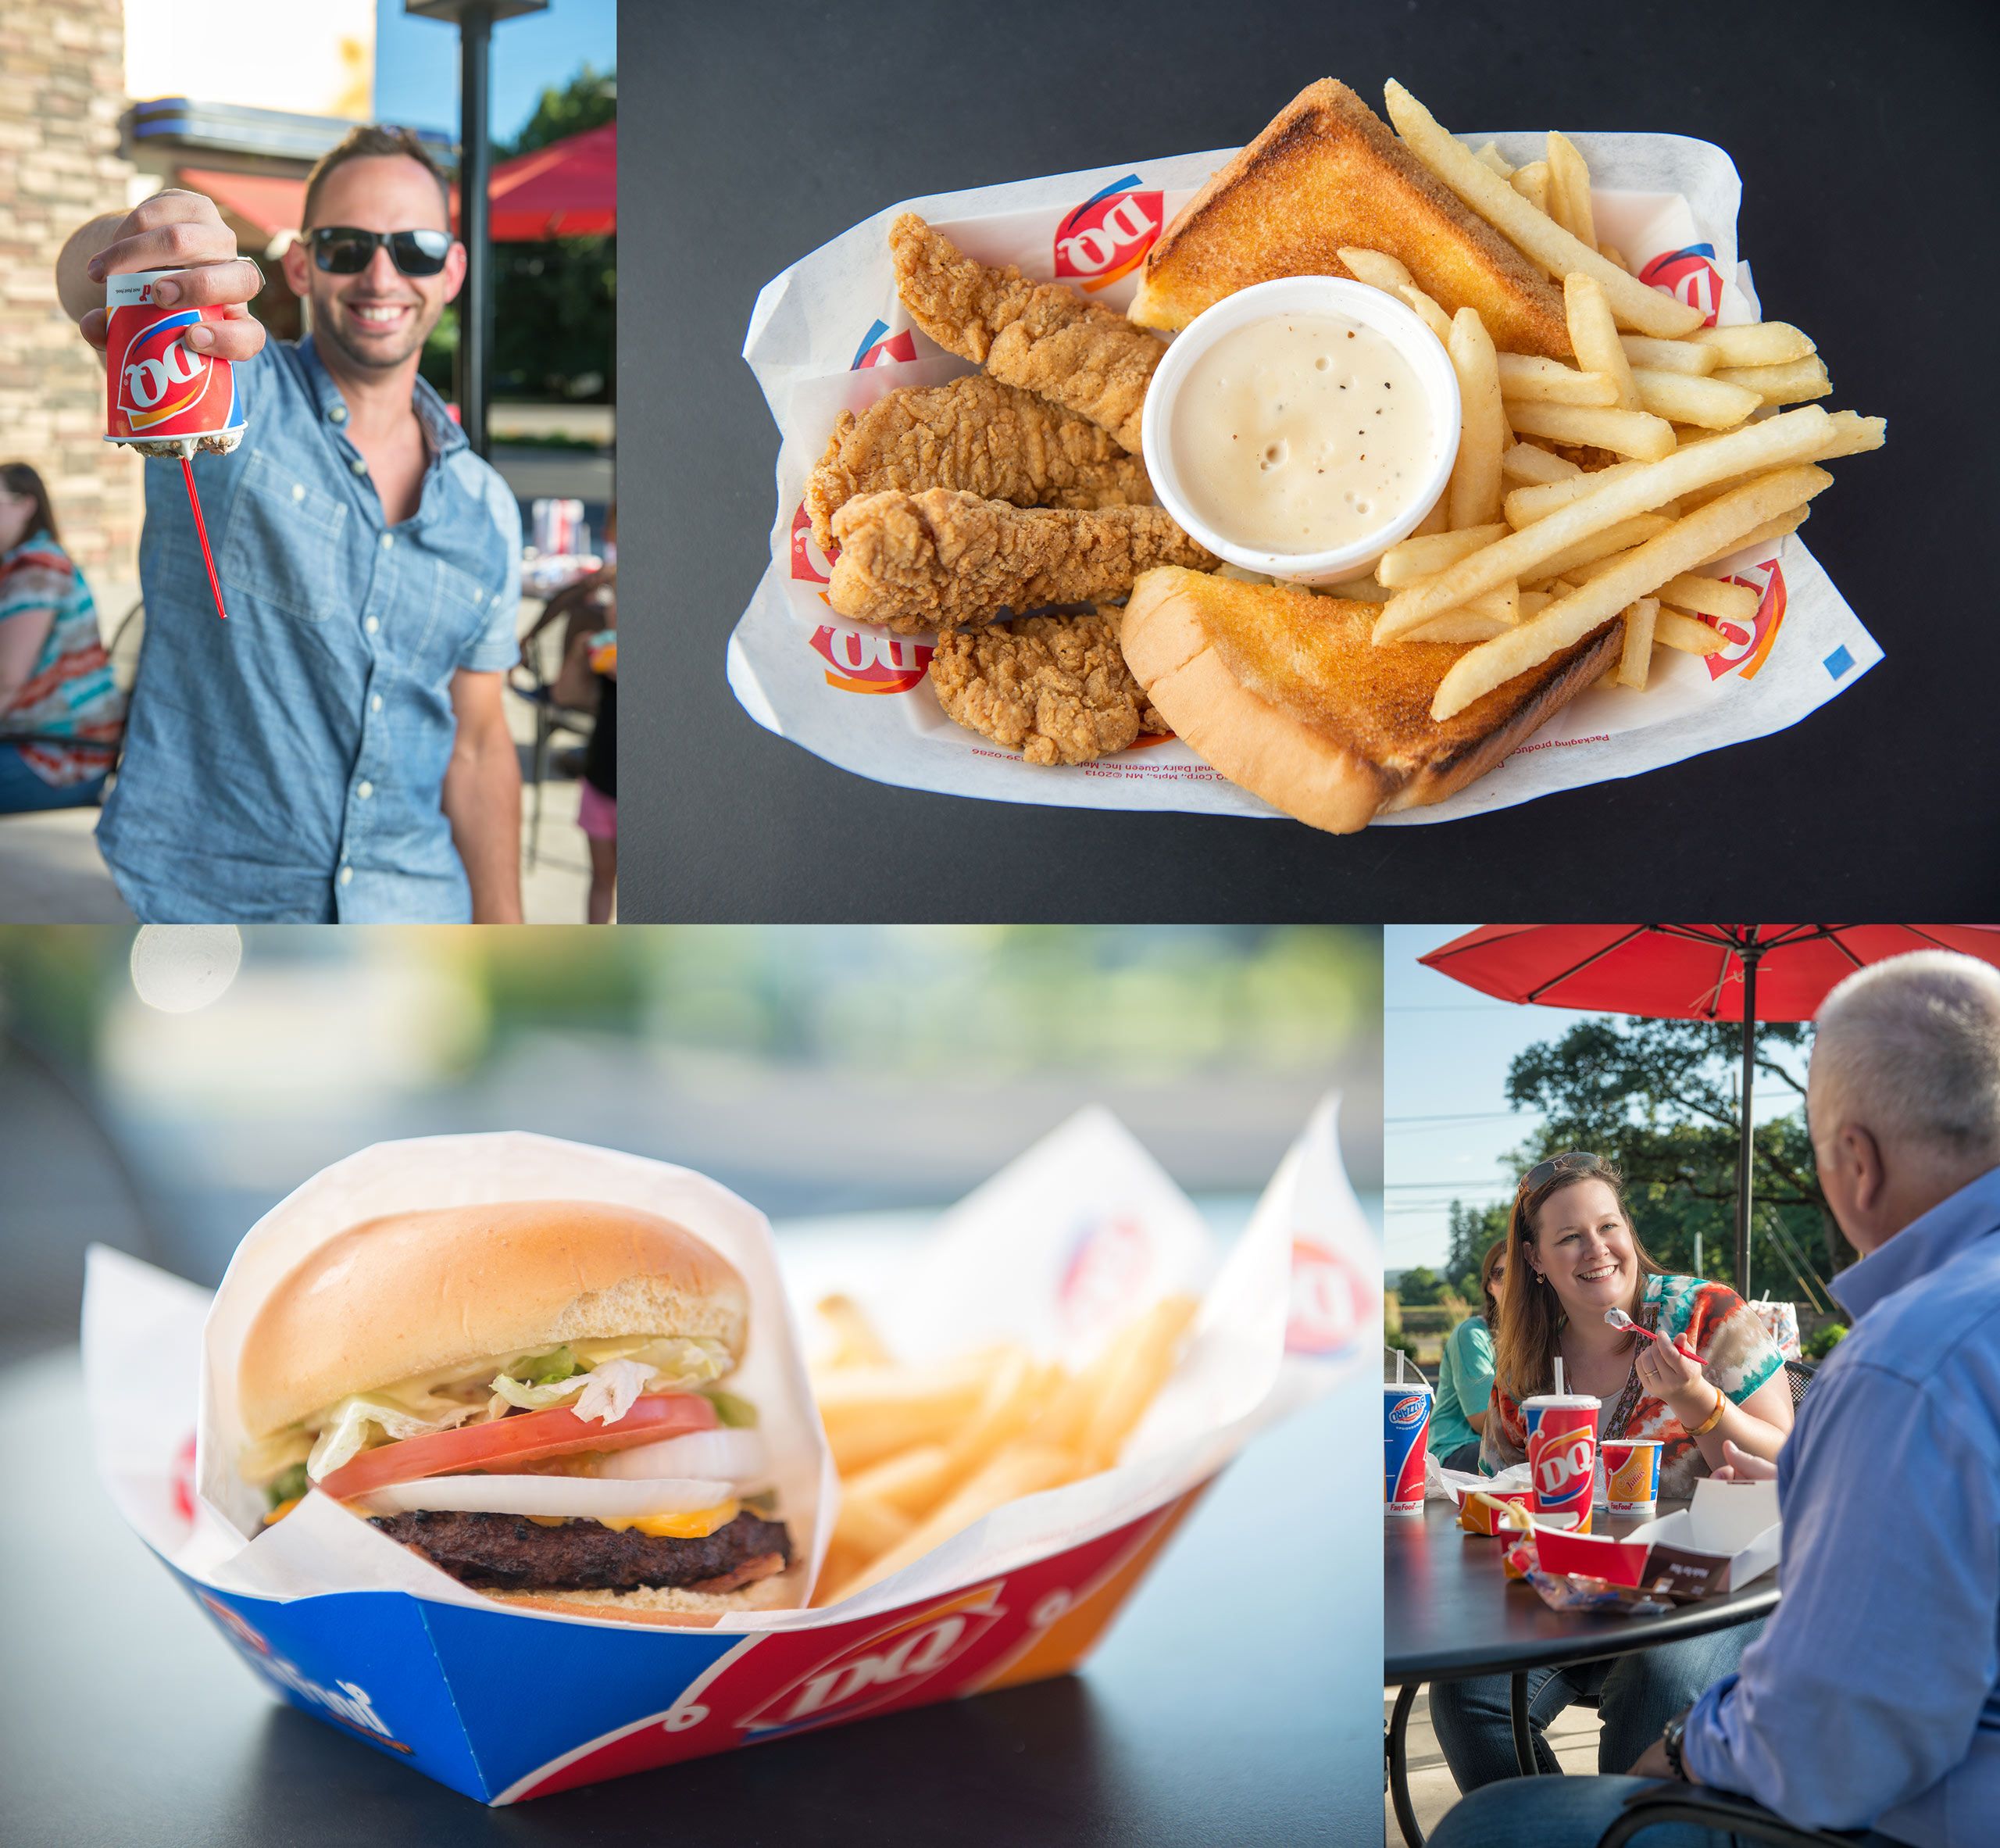 Imagery shot for the Creswell OR Dairy Queen